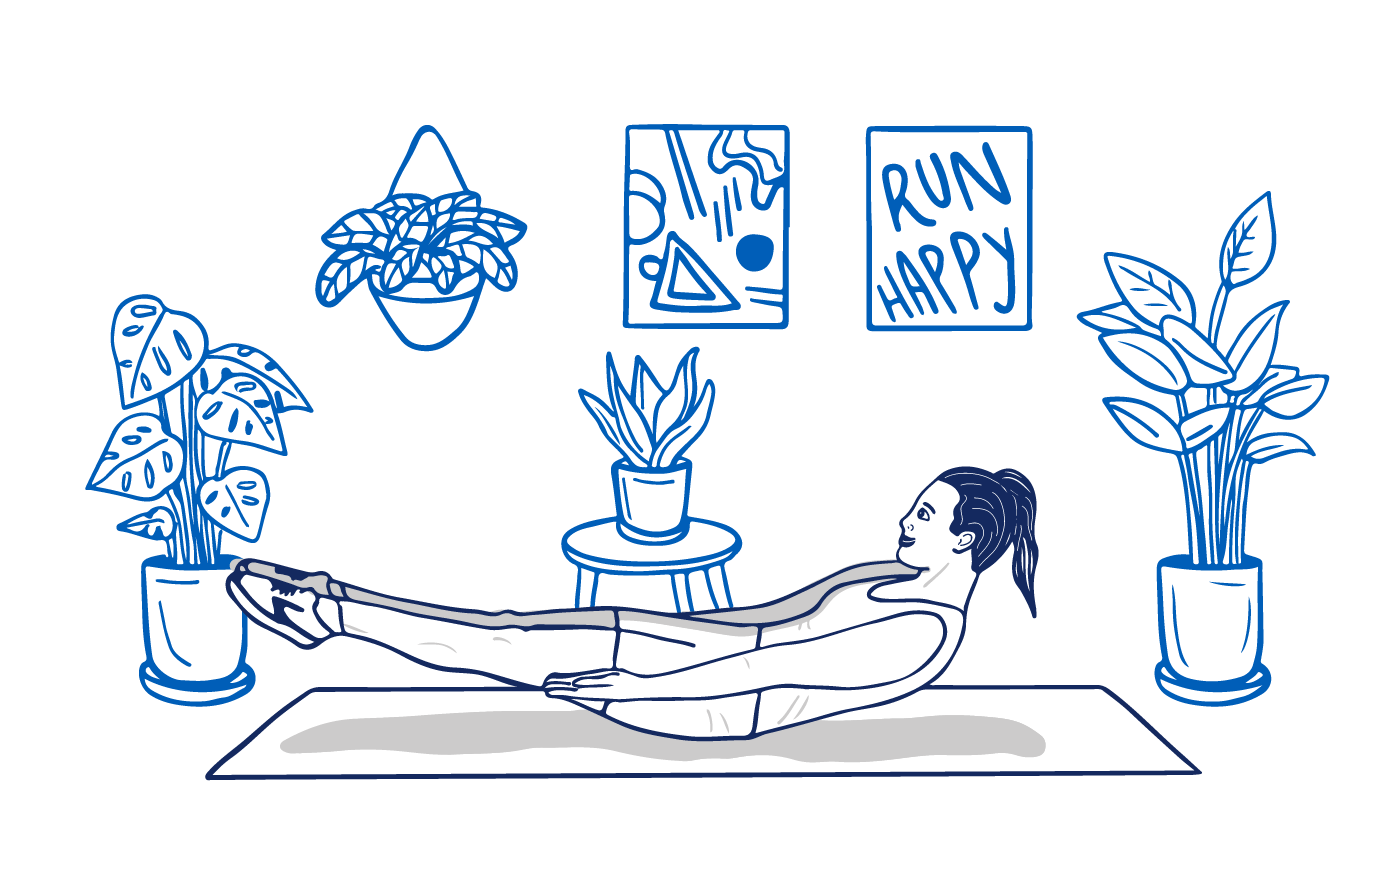 An illustration of a woman doing V-ups on a yoga mat in her living room surrounded by houseplants, an abstract art painting, and a poster that says “Run Happy.